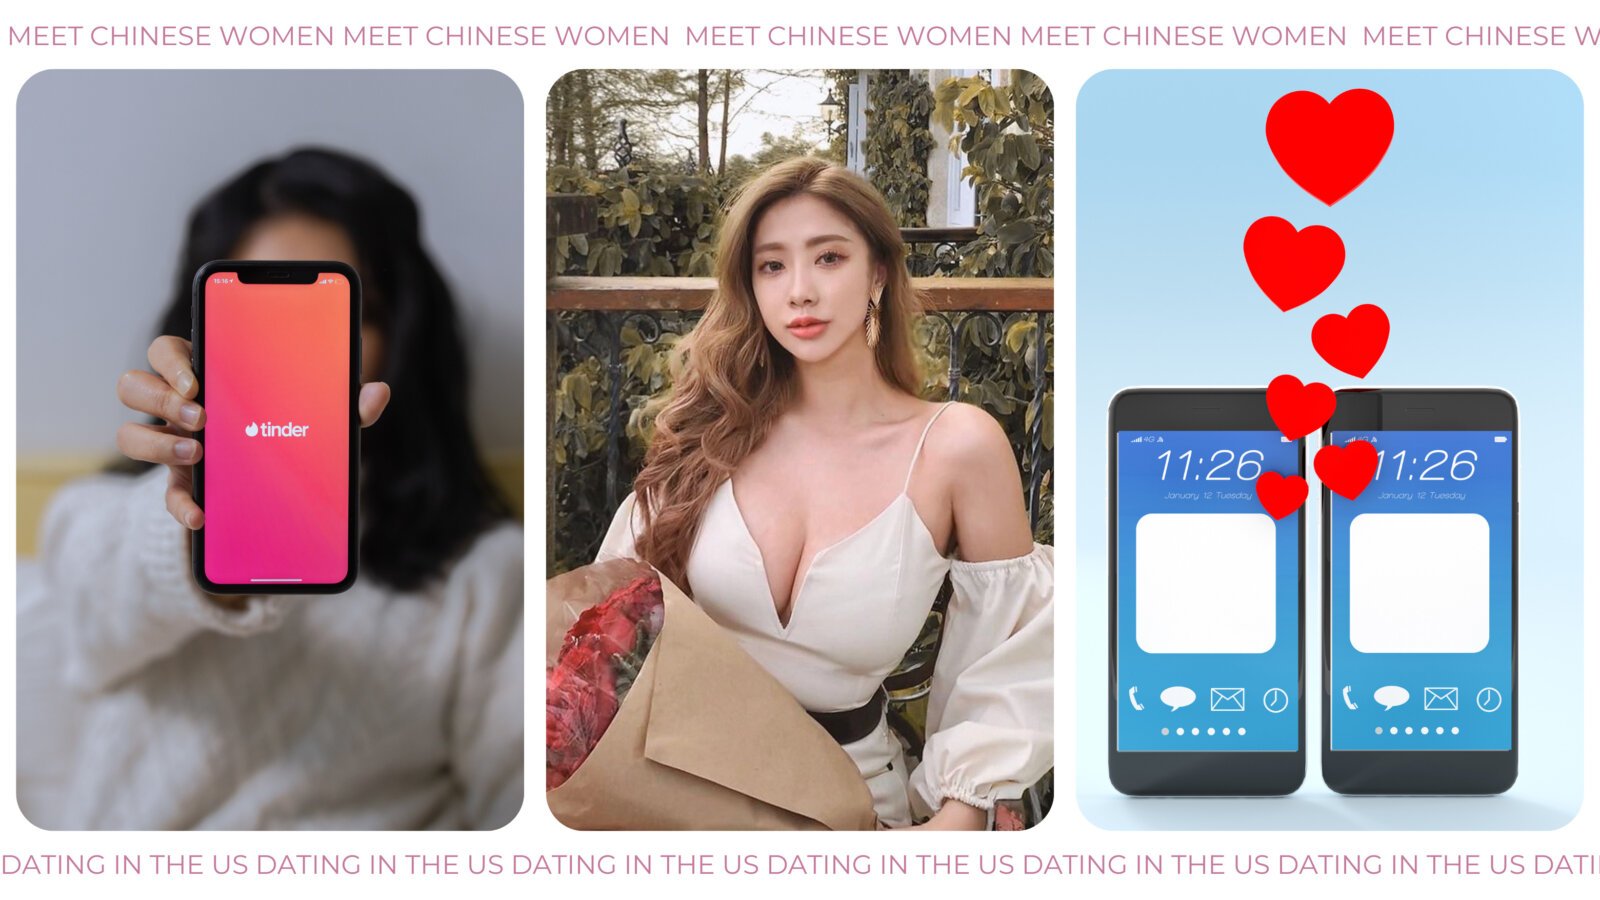 meet Chinese women in the US using Tinder